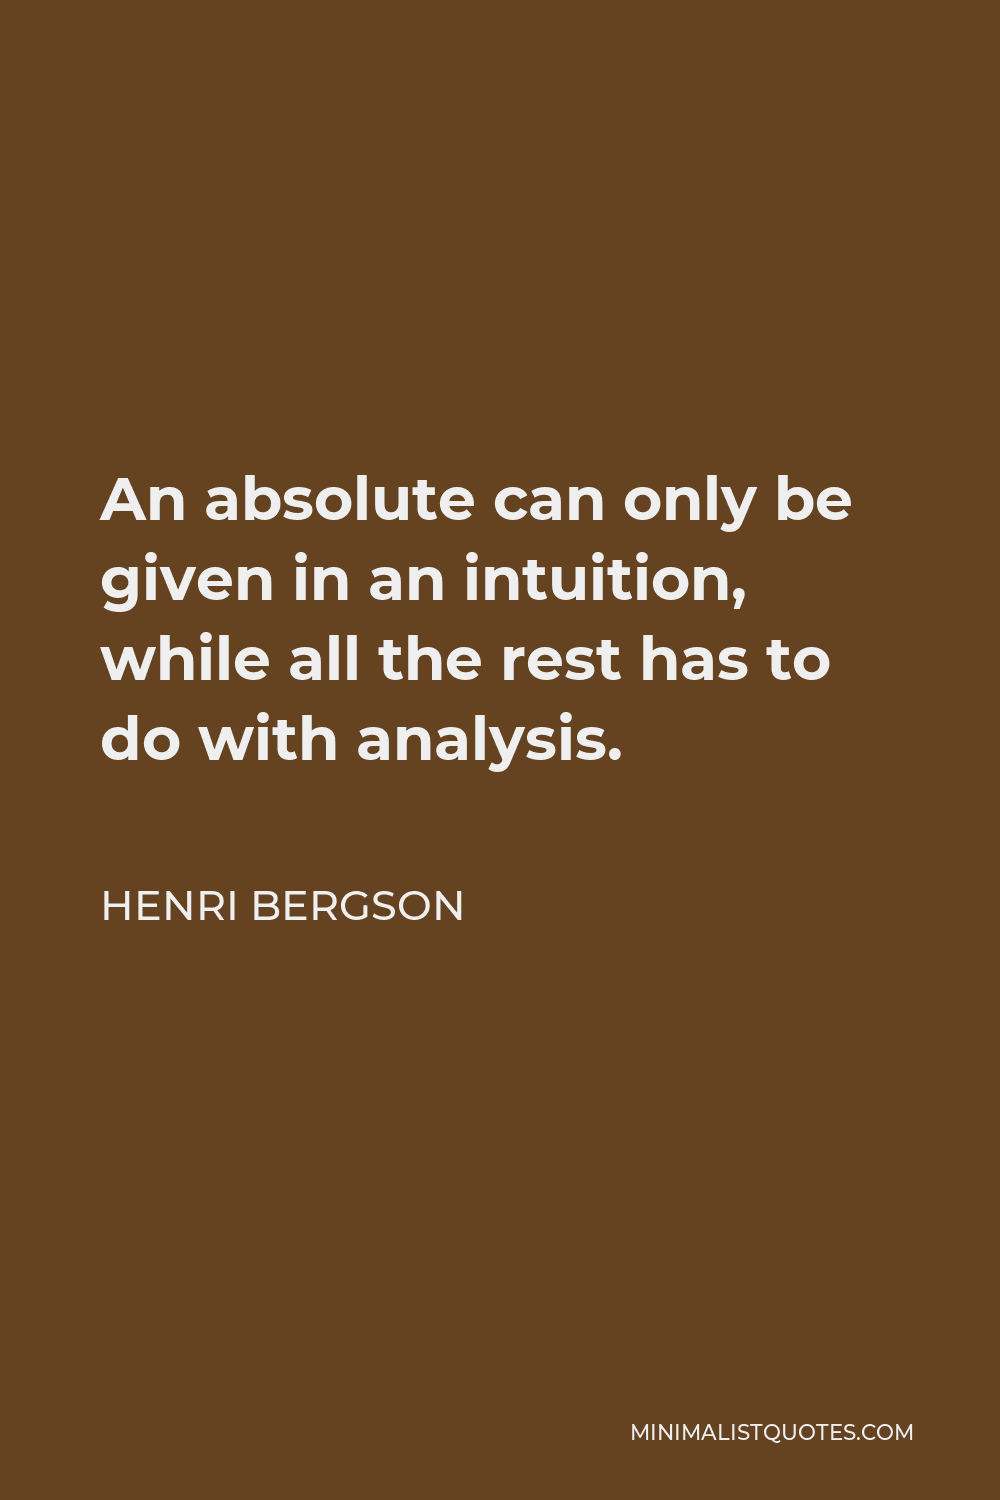 Henri Bergson Quote - An absolute can only be given in an intuition, while all the rest has to do with analysis.